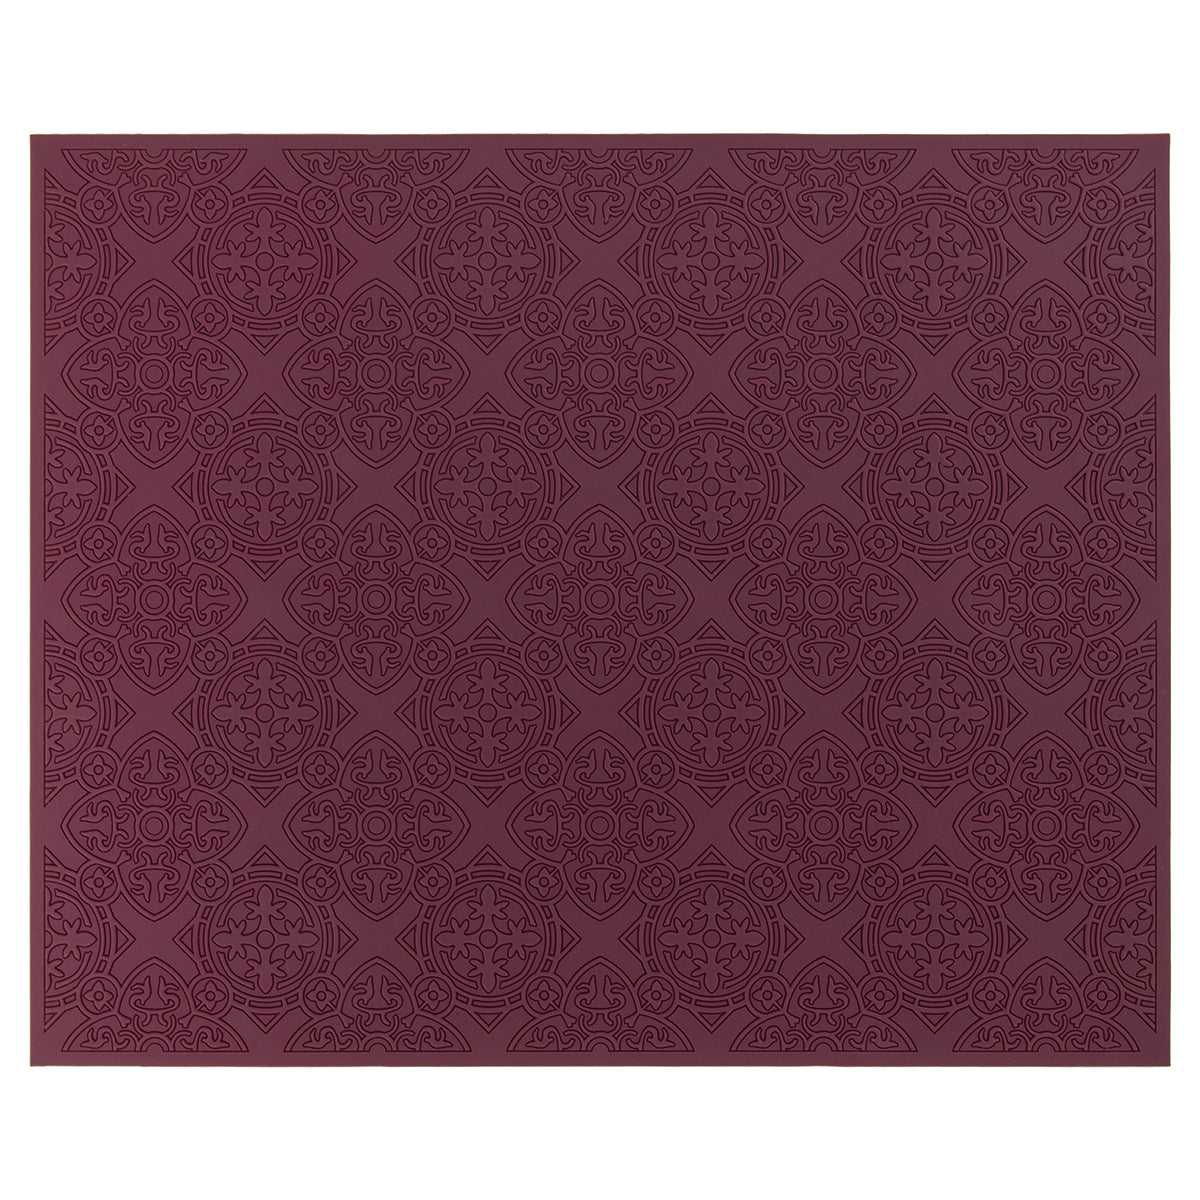 Shop The Latest Collection Of Images D'Orient Placemat Urban Prune - Pla-400011 In Lebanon